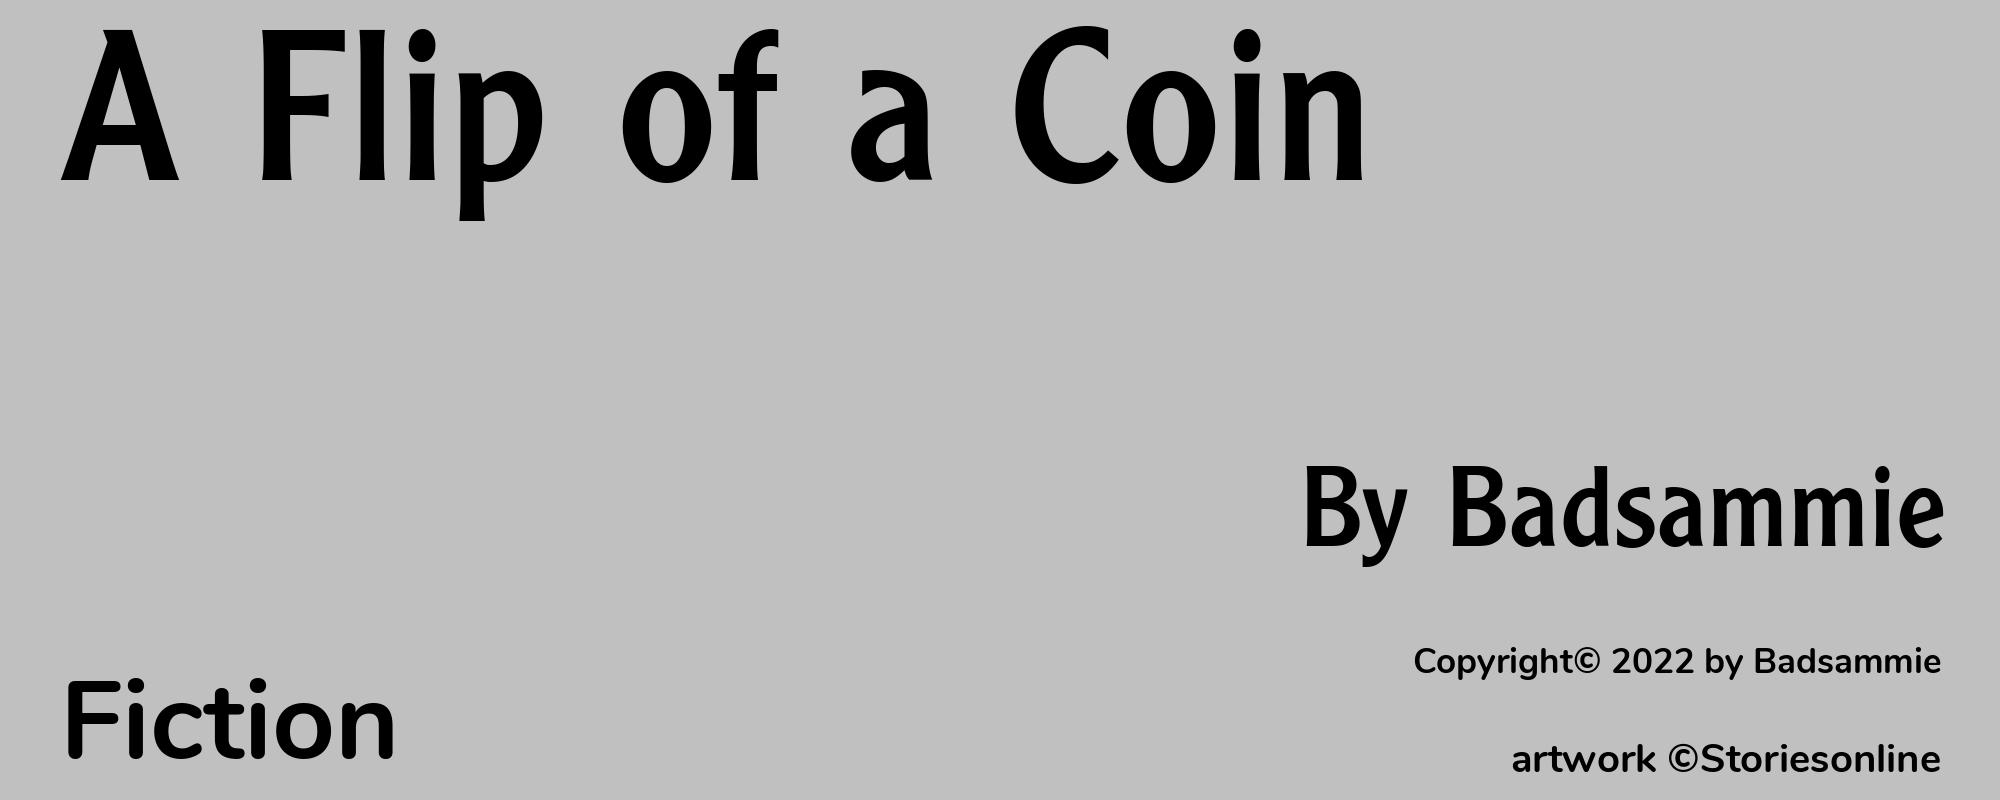 A Flip of a Coin - Cover